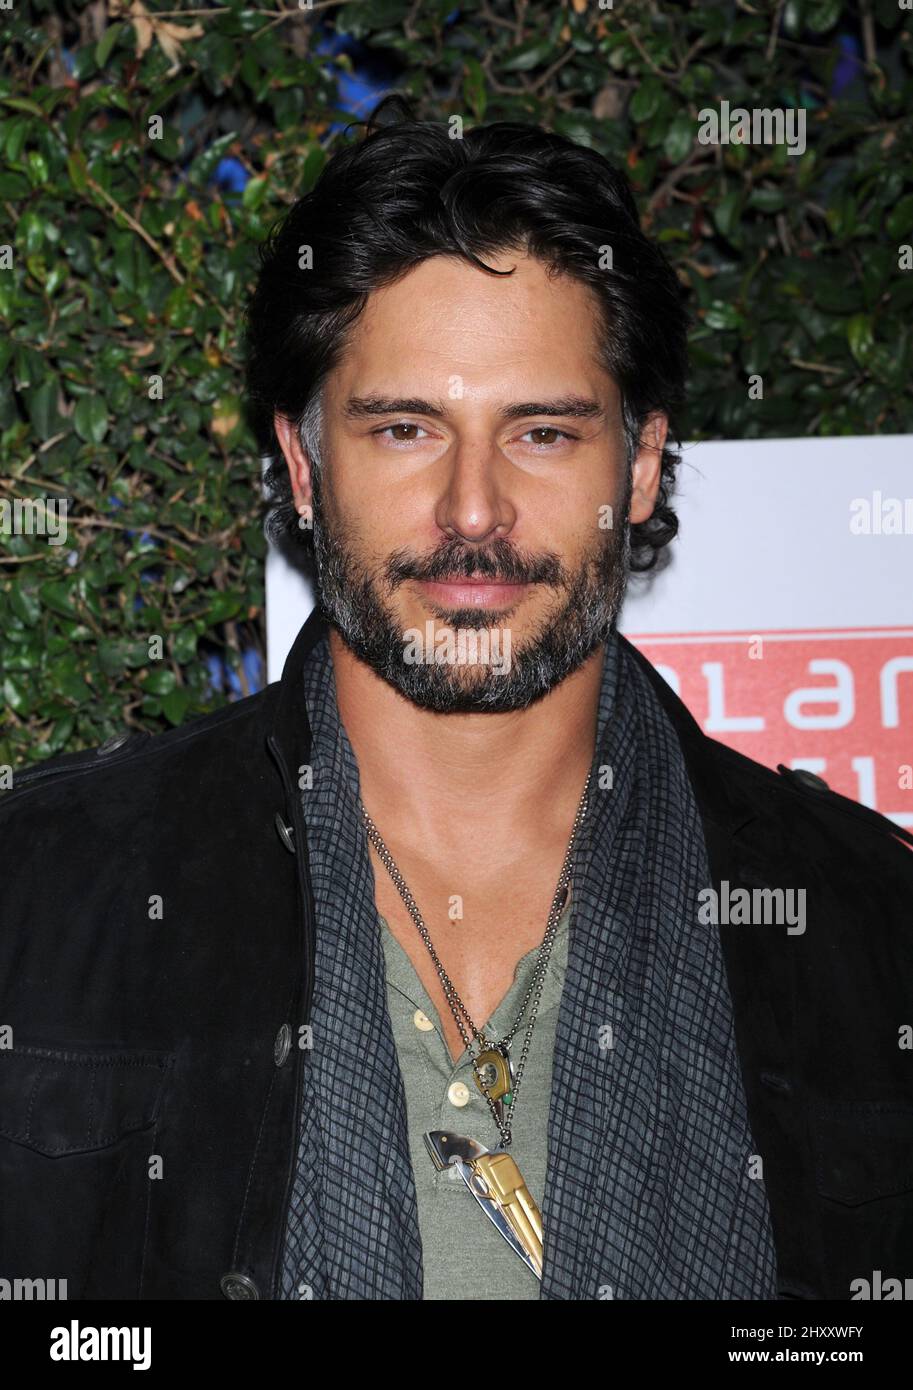 Joe Manganiello attending the Planet Dailies And Mixology 101 Grand Opening at Farmers Market on April 5, 2012 in Los Angeles, California. Stock Photo